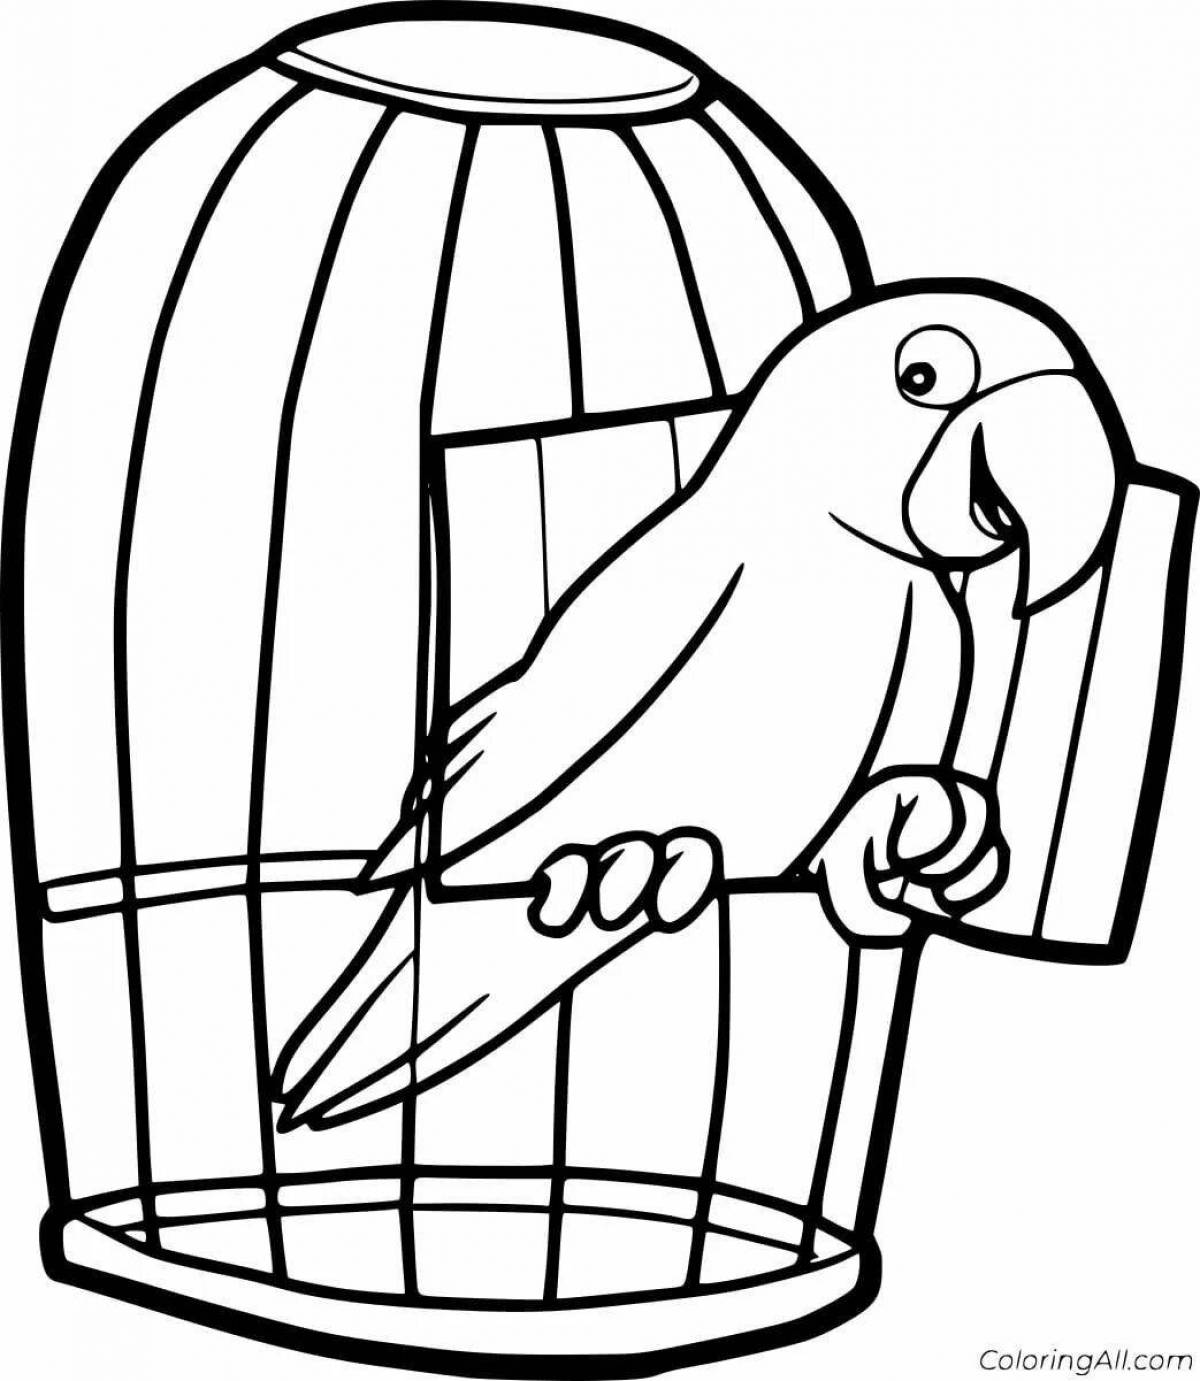 Color-carnival cage coloring page for kids